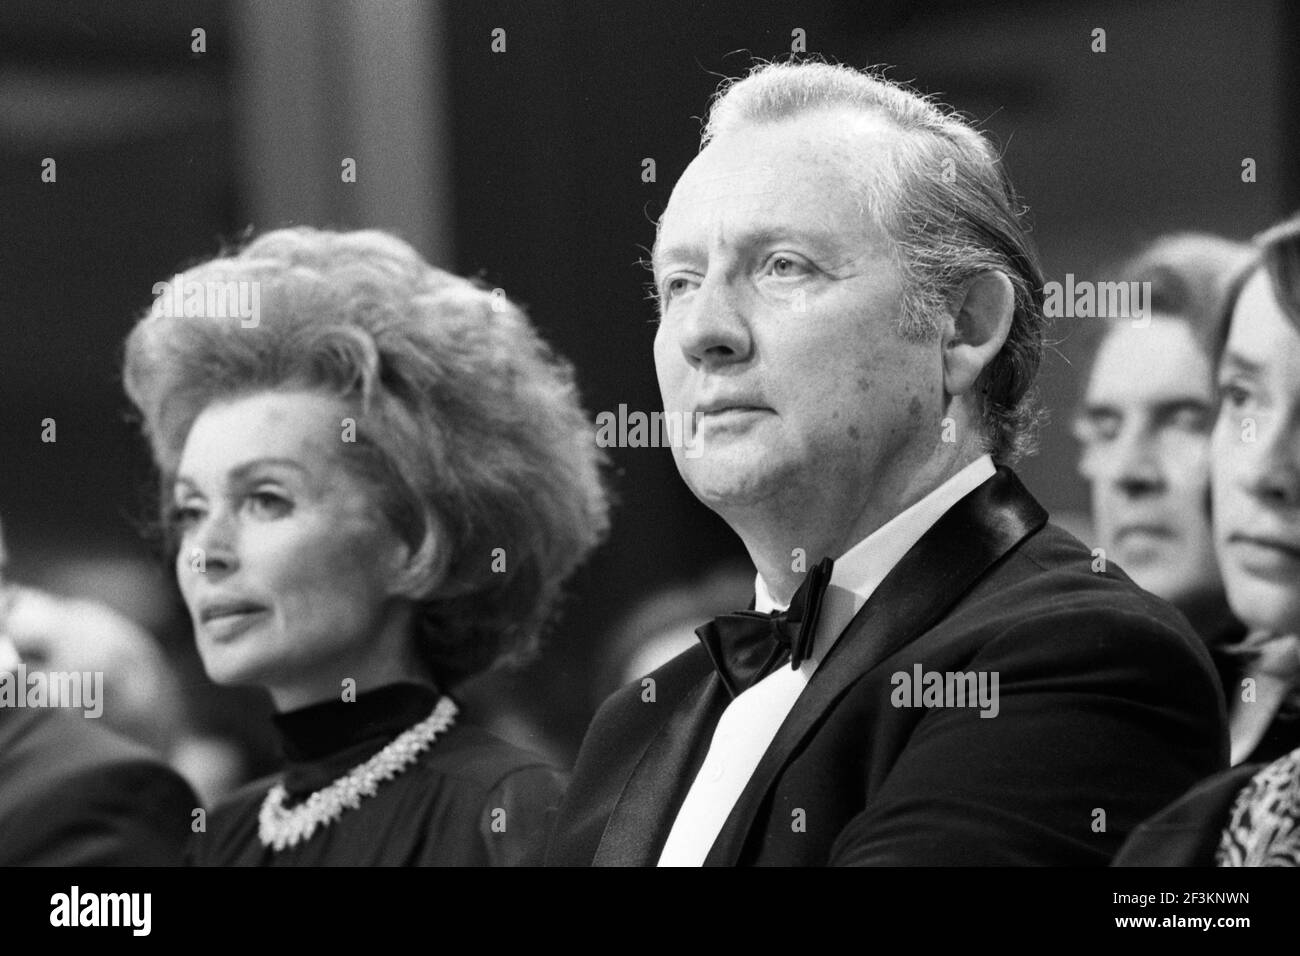 Axel Caesar SPRINGER, Germany, publisher, sits next to Lilli PALMER, Germany, actress, author, landscape format; Black and white portrait, portrait, vertical format, b / w recording, here at the awarding of the 'Golden Camera' Golden Camera in Berlin, 19.01.1973. Â | usage worldwide Stock Photo